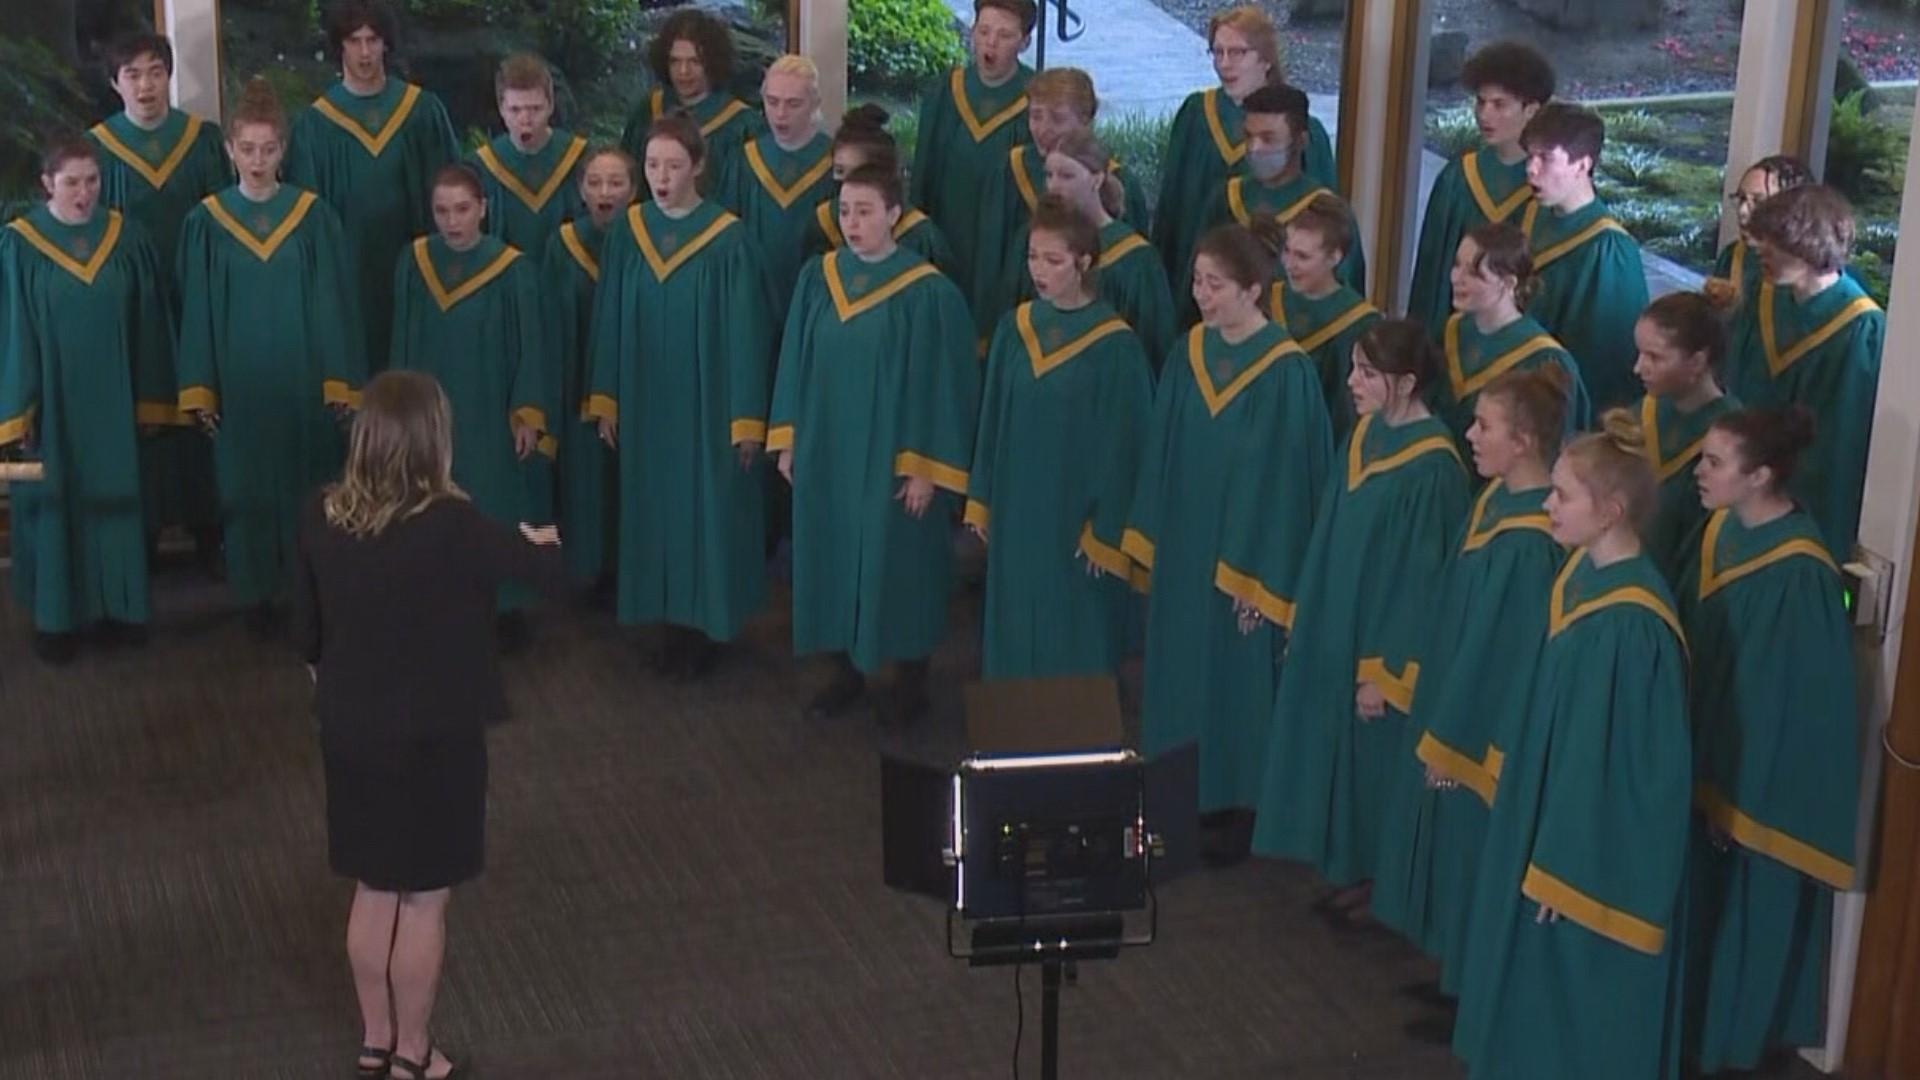 The symphonic choir from West Linn High School are state champions. They stopped by the KGW station to perform and talked about the challenges of the pandemic.